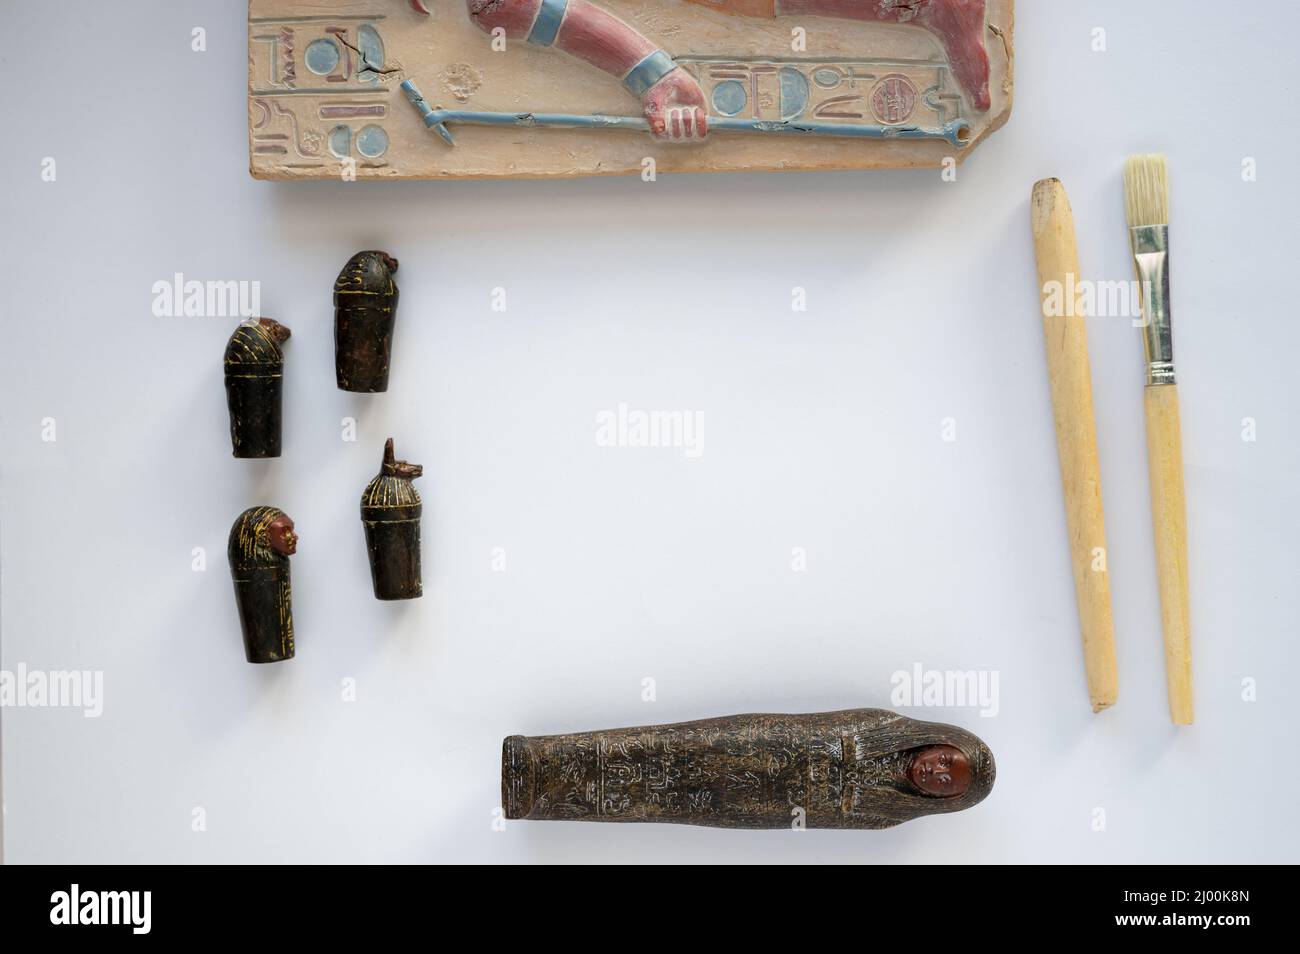 Calgary, Alberta - March 15, 2022:  Toy Egyptian sarcophagus with archeologits tools on white background. Stock Photo